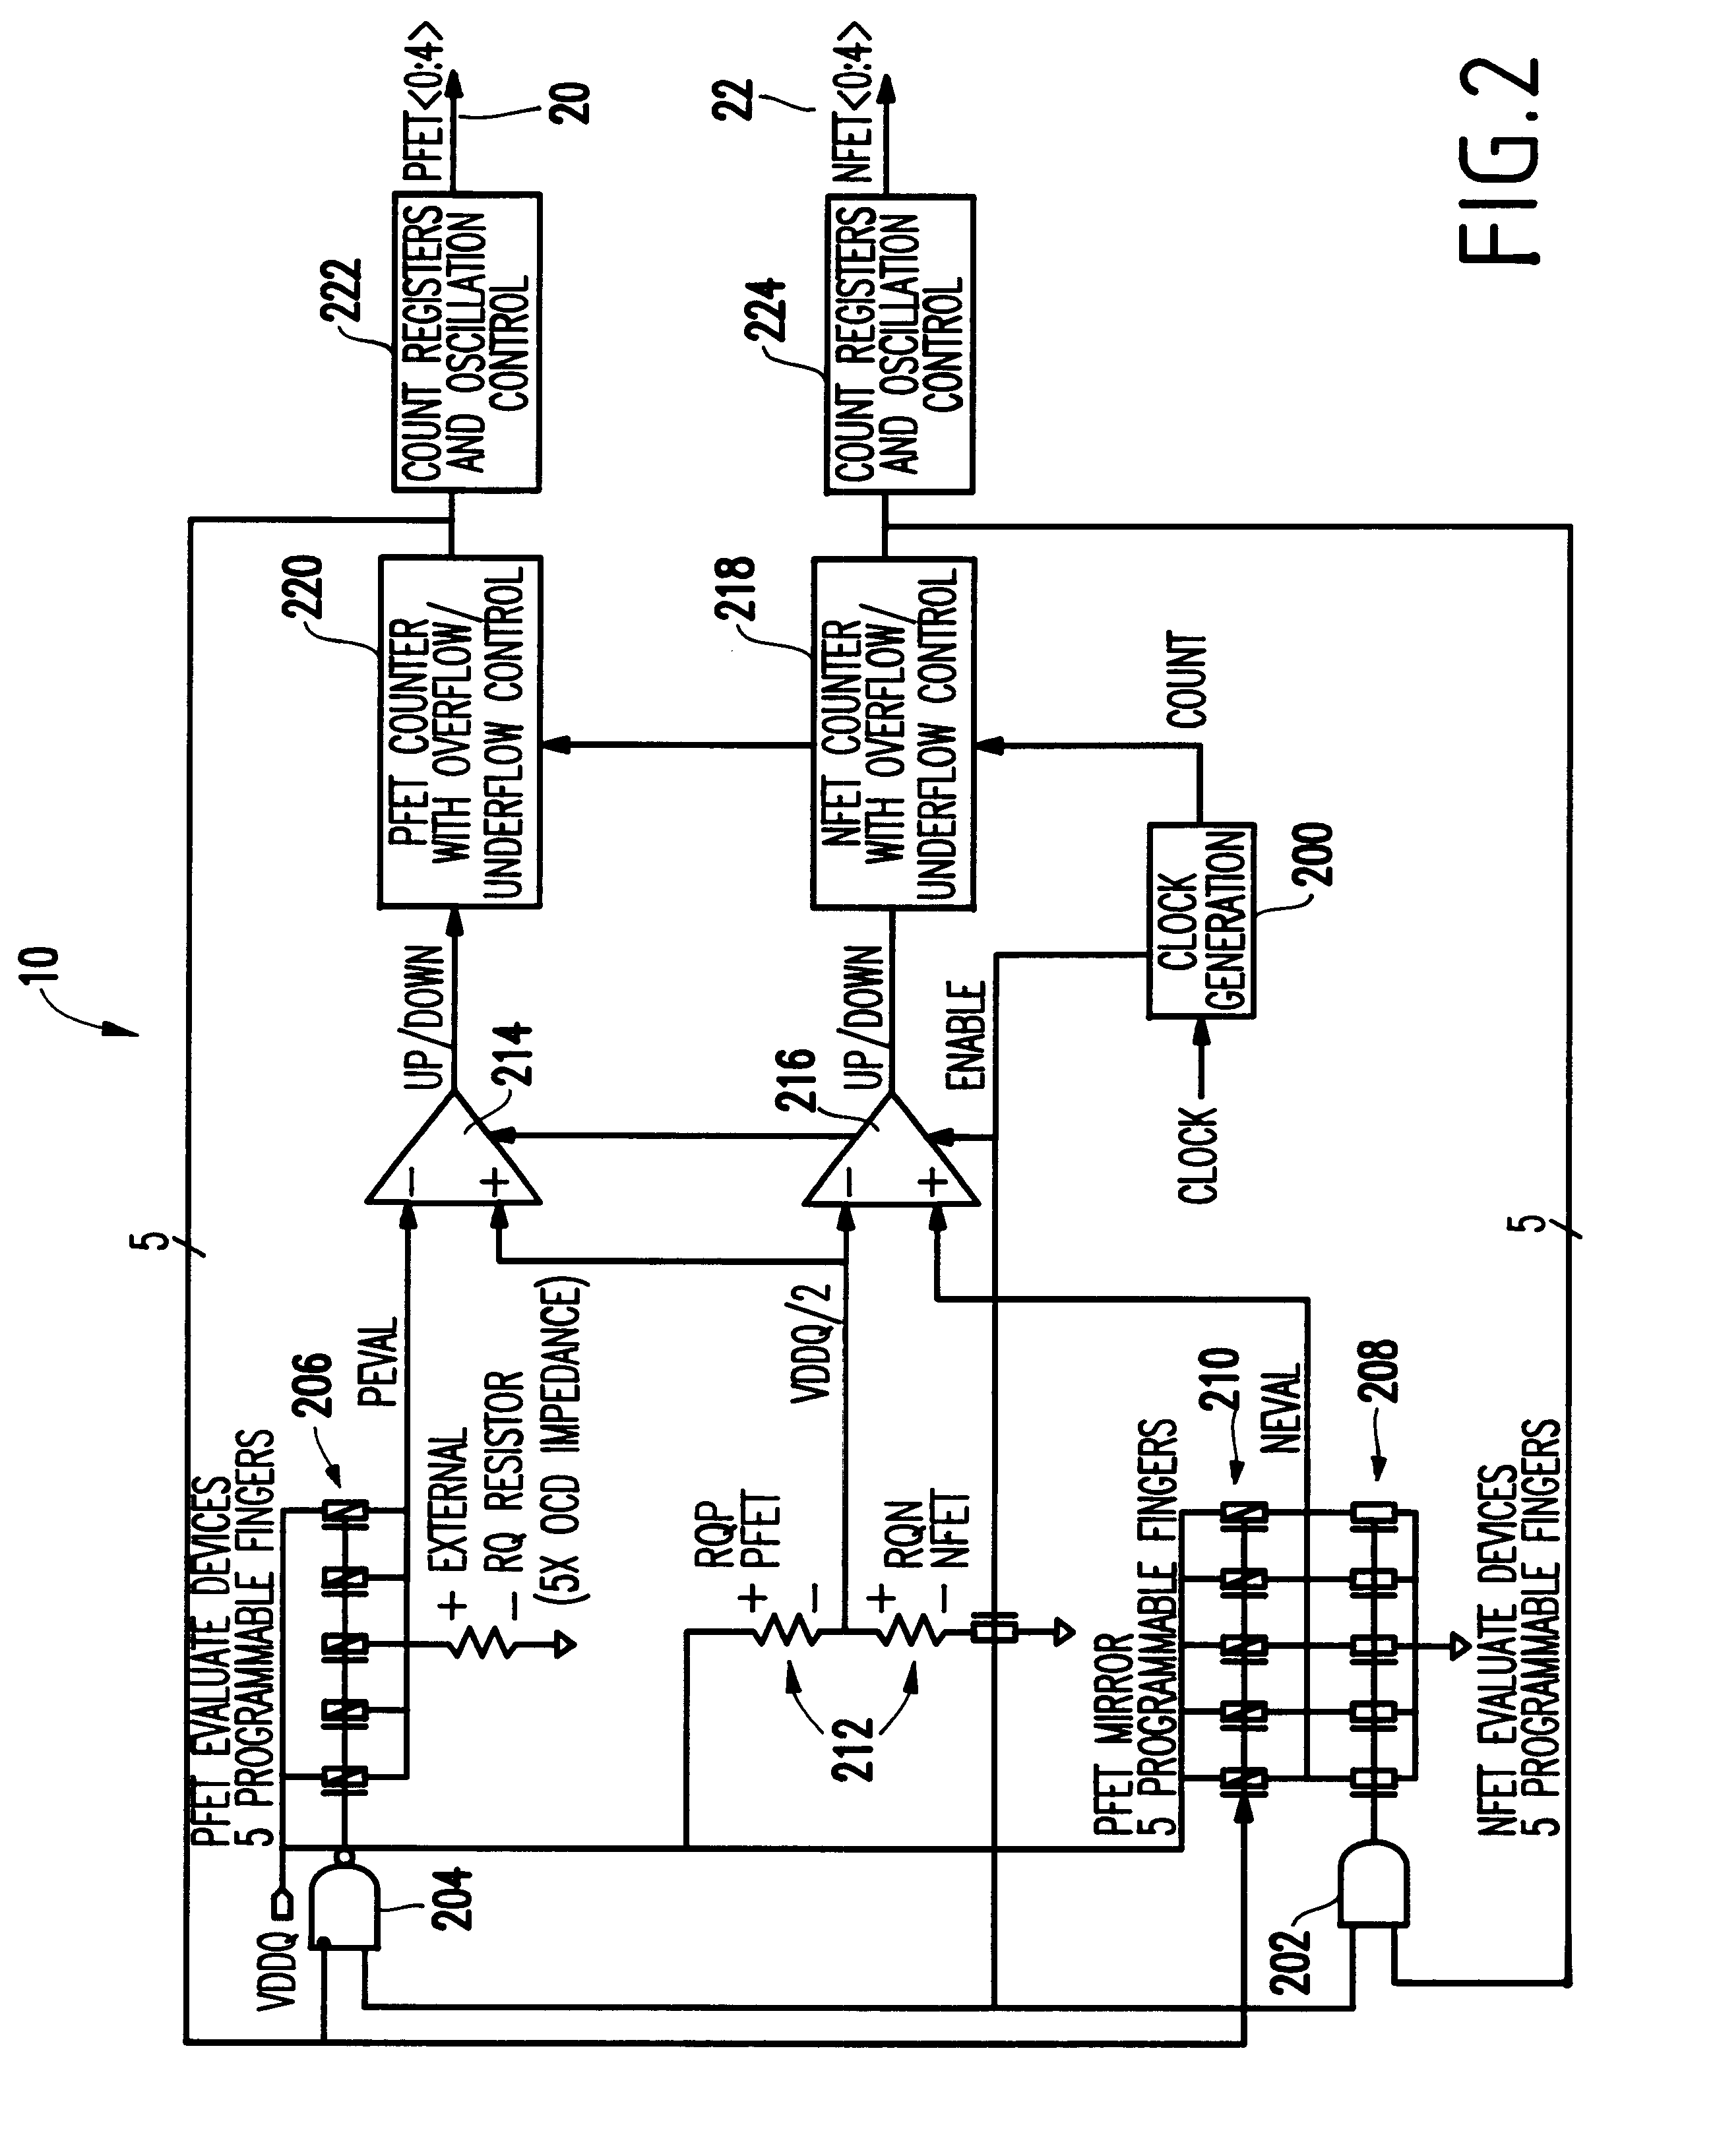 BIST circuit for variable impedance system